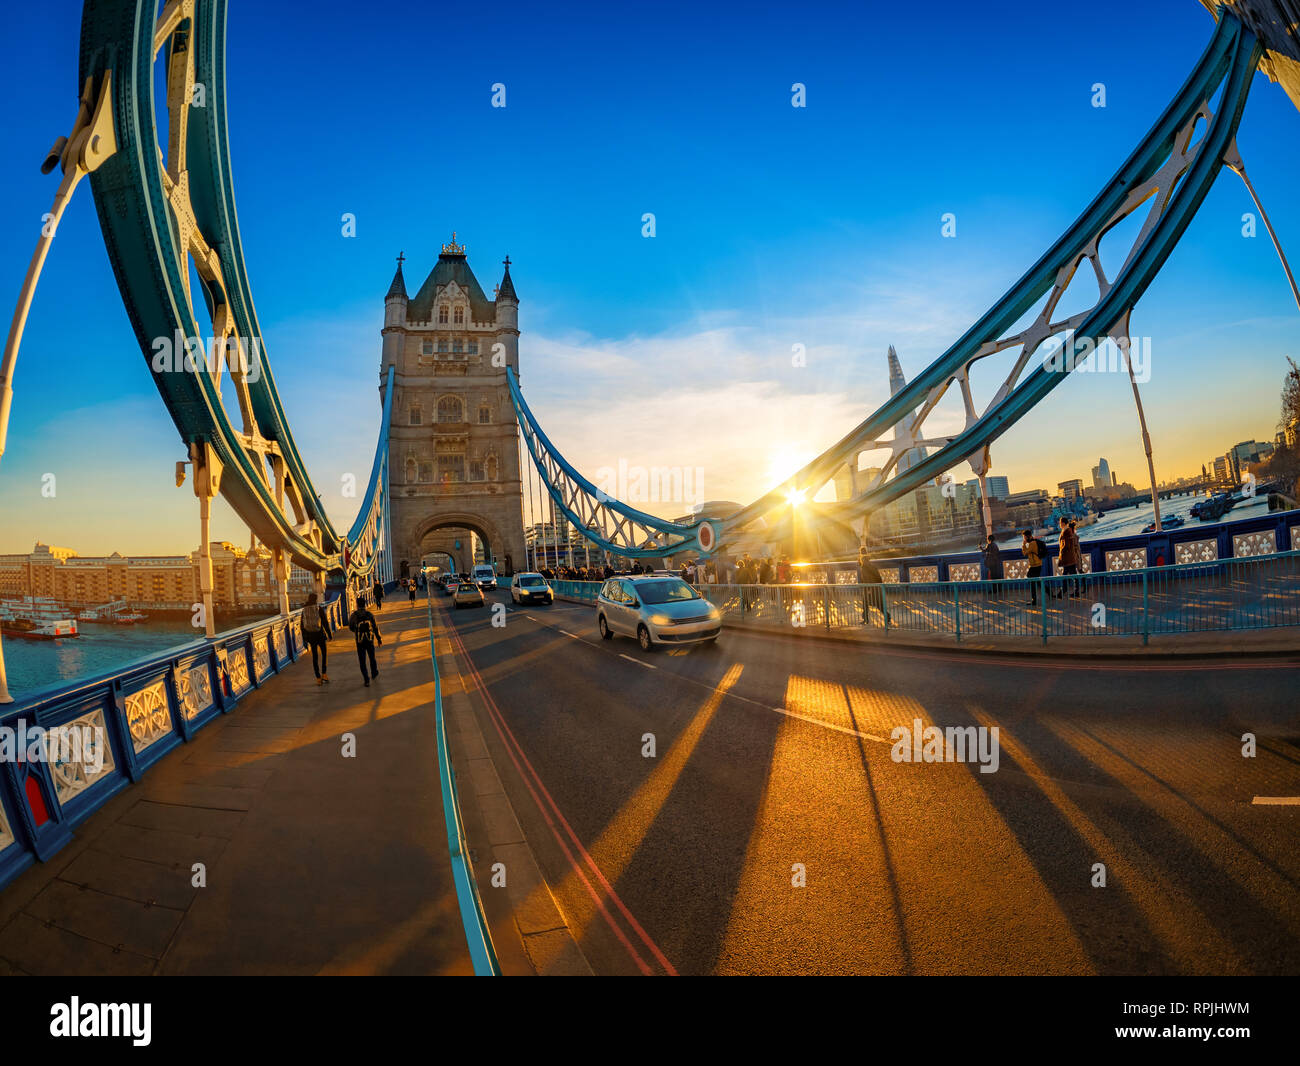 Wide view of beautiful sunset over the Tower Bridge in London, England, UK Stock Photo